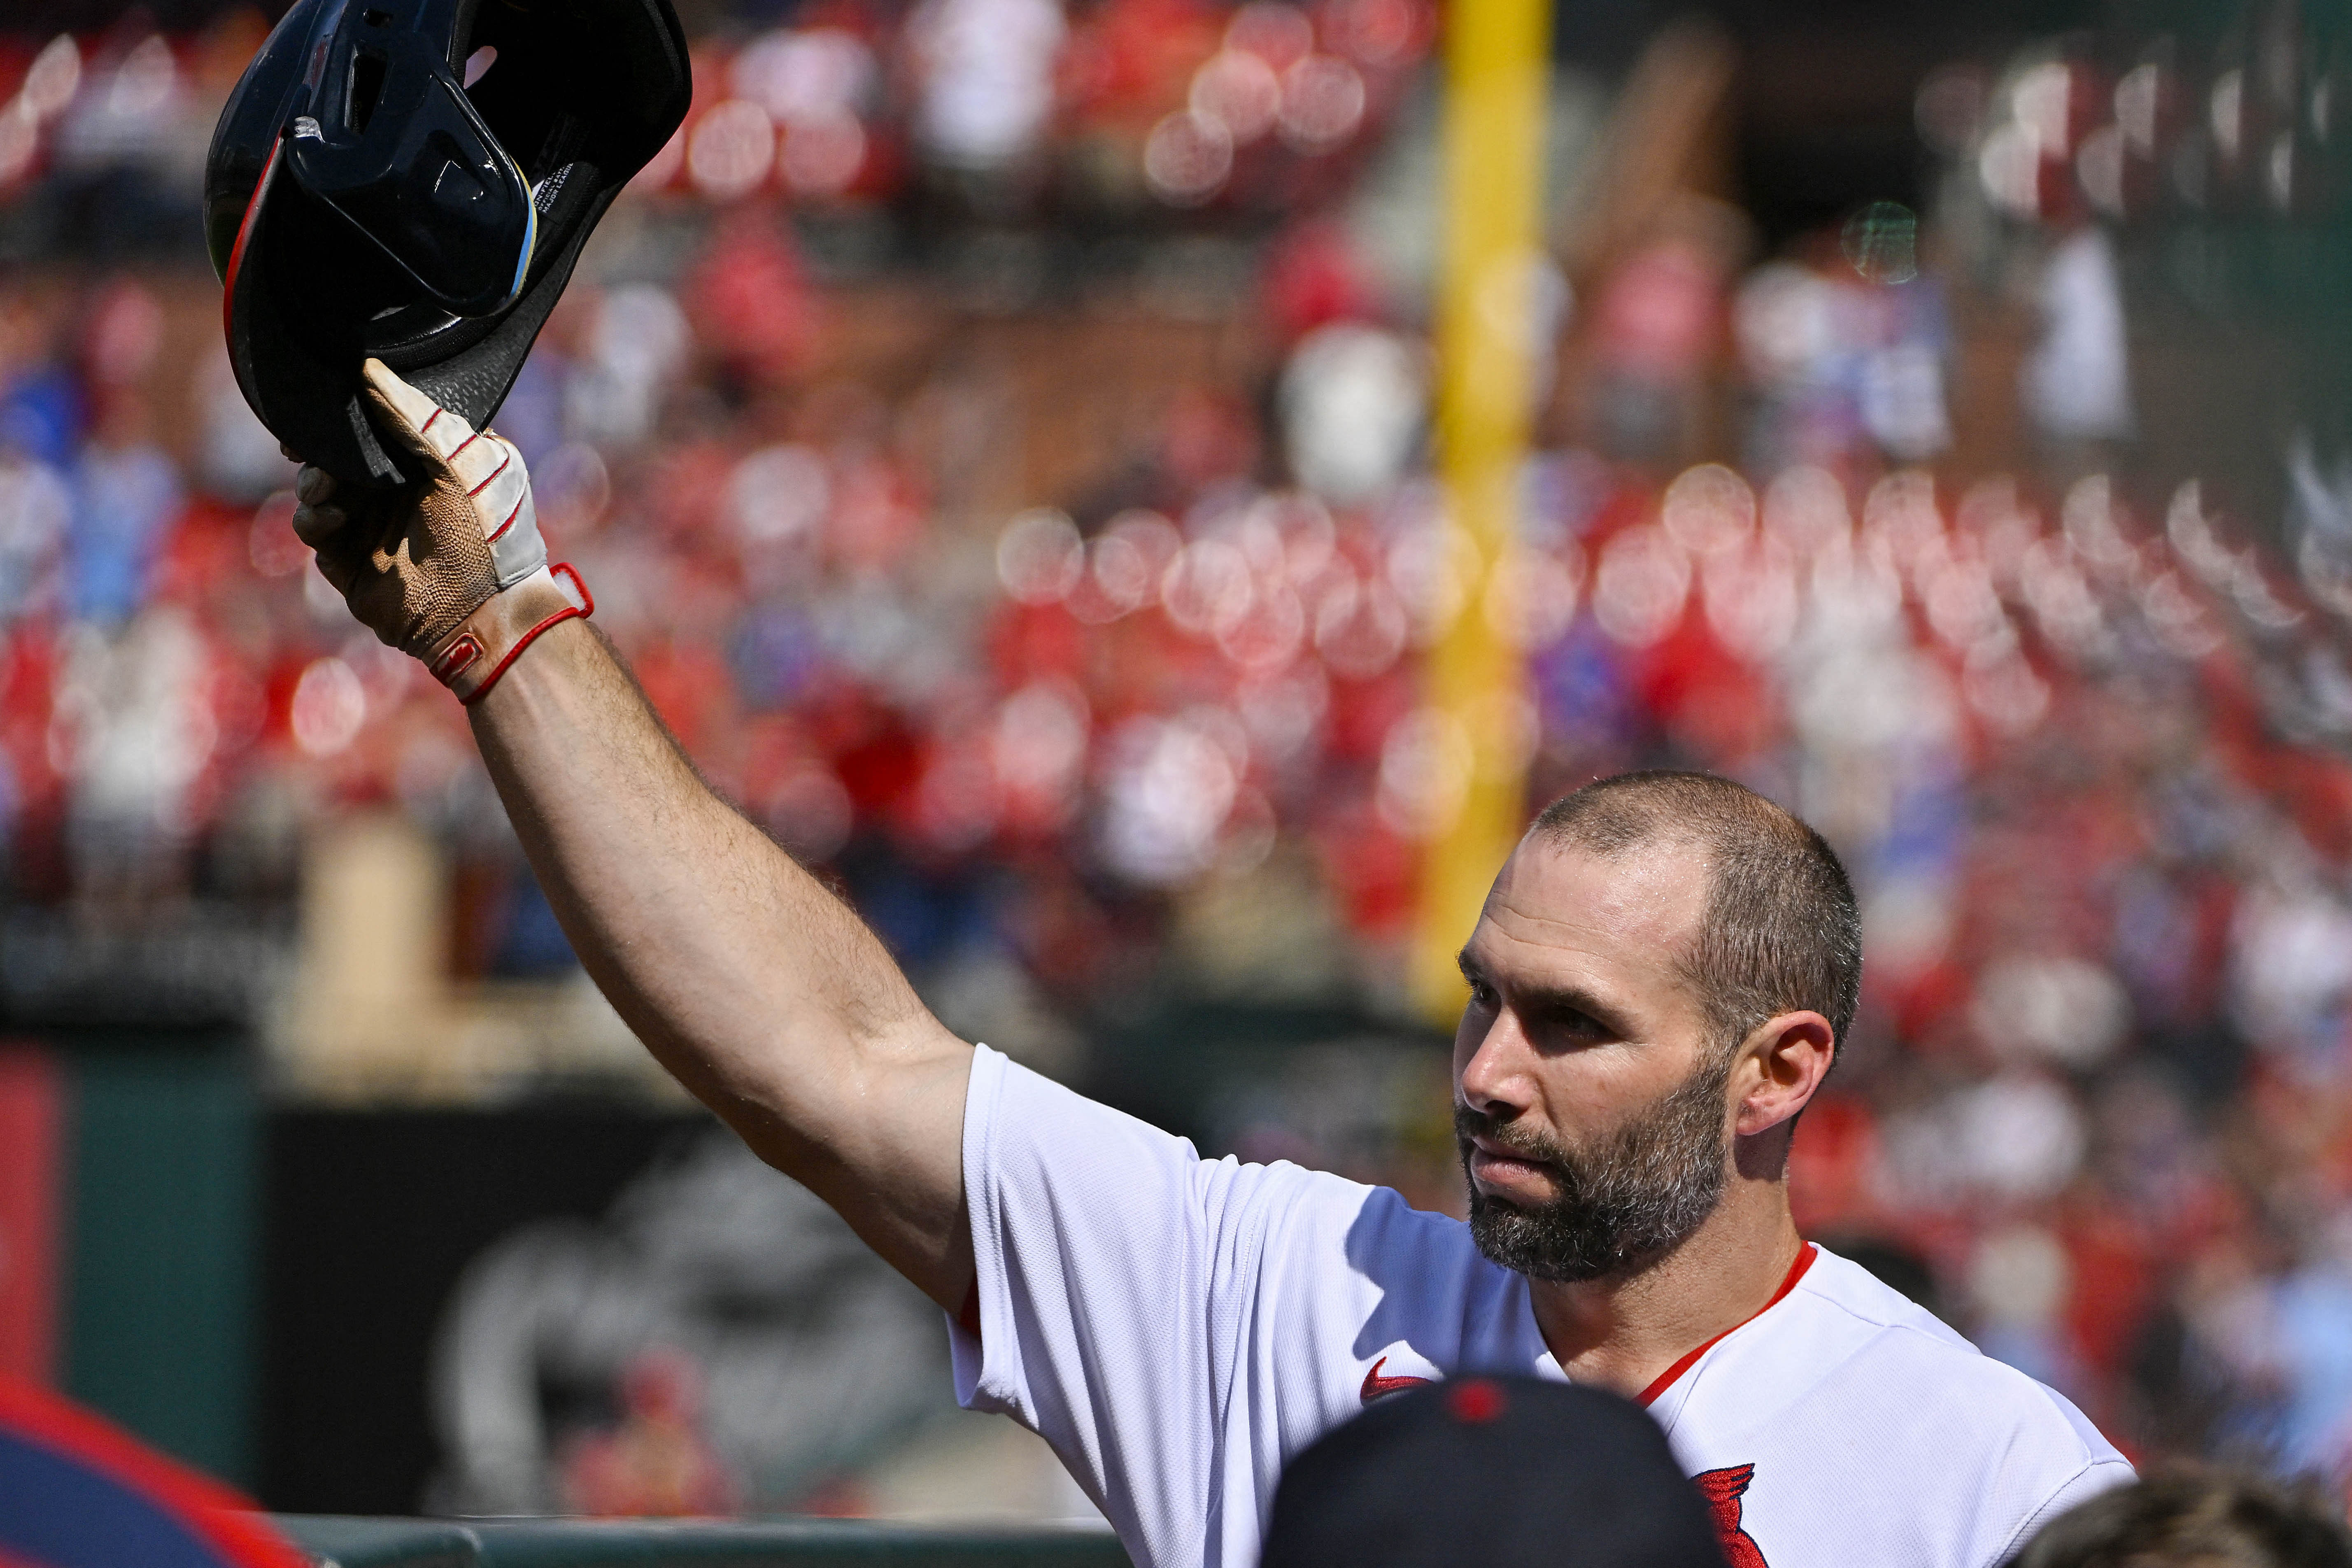 How a Paul Goldschmidt-inspired adjustment helped the Phillies